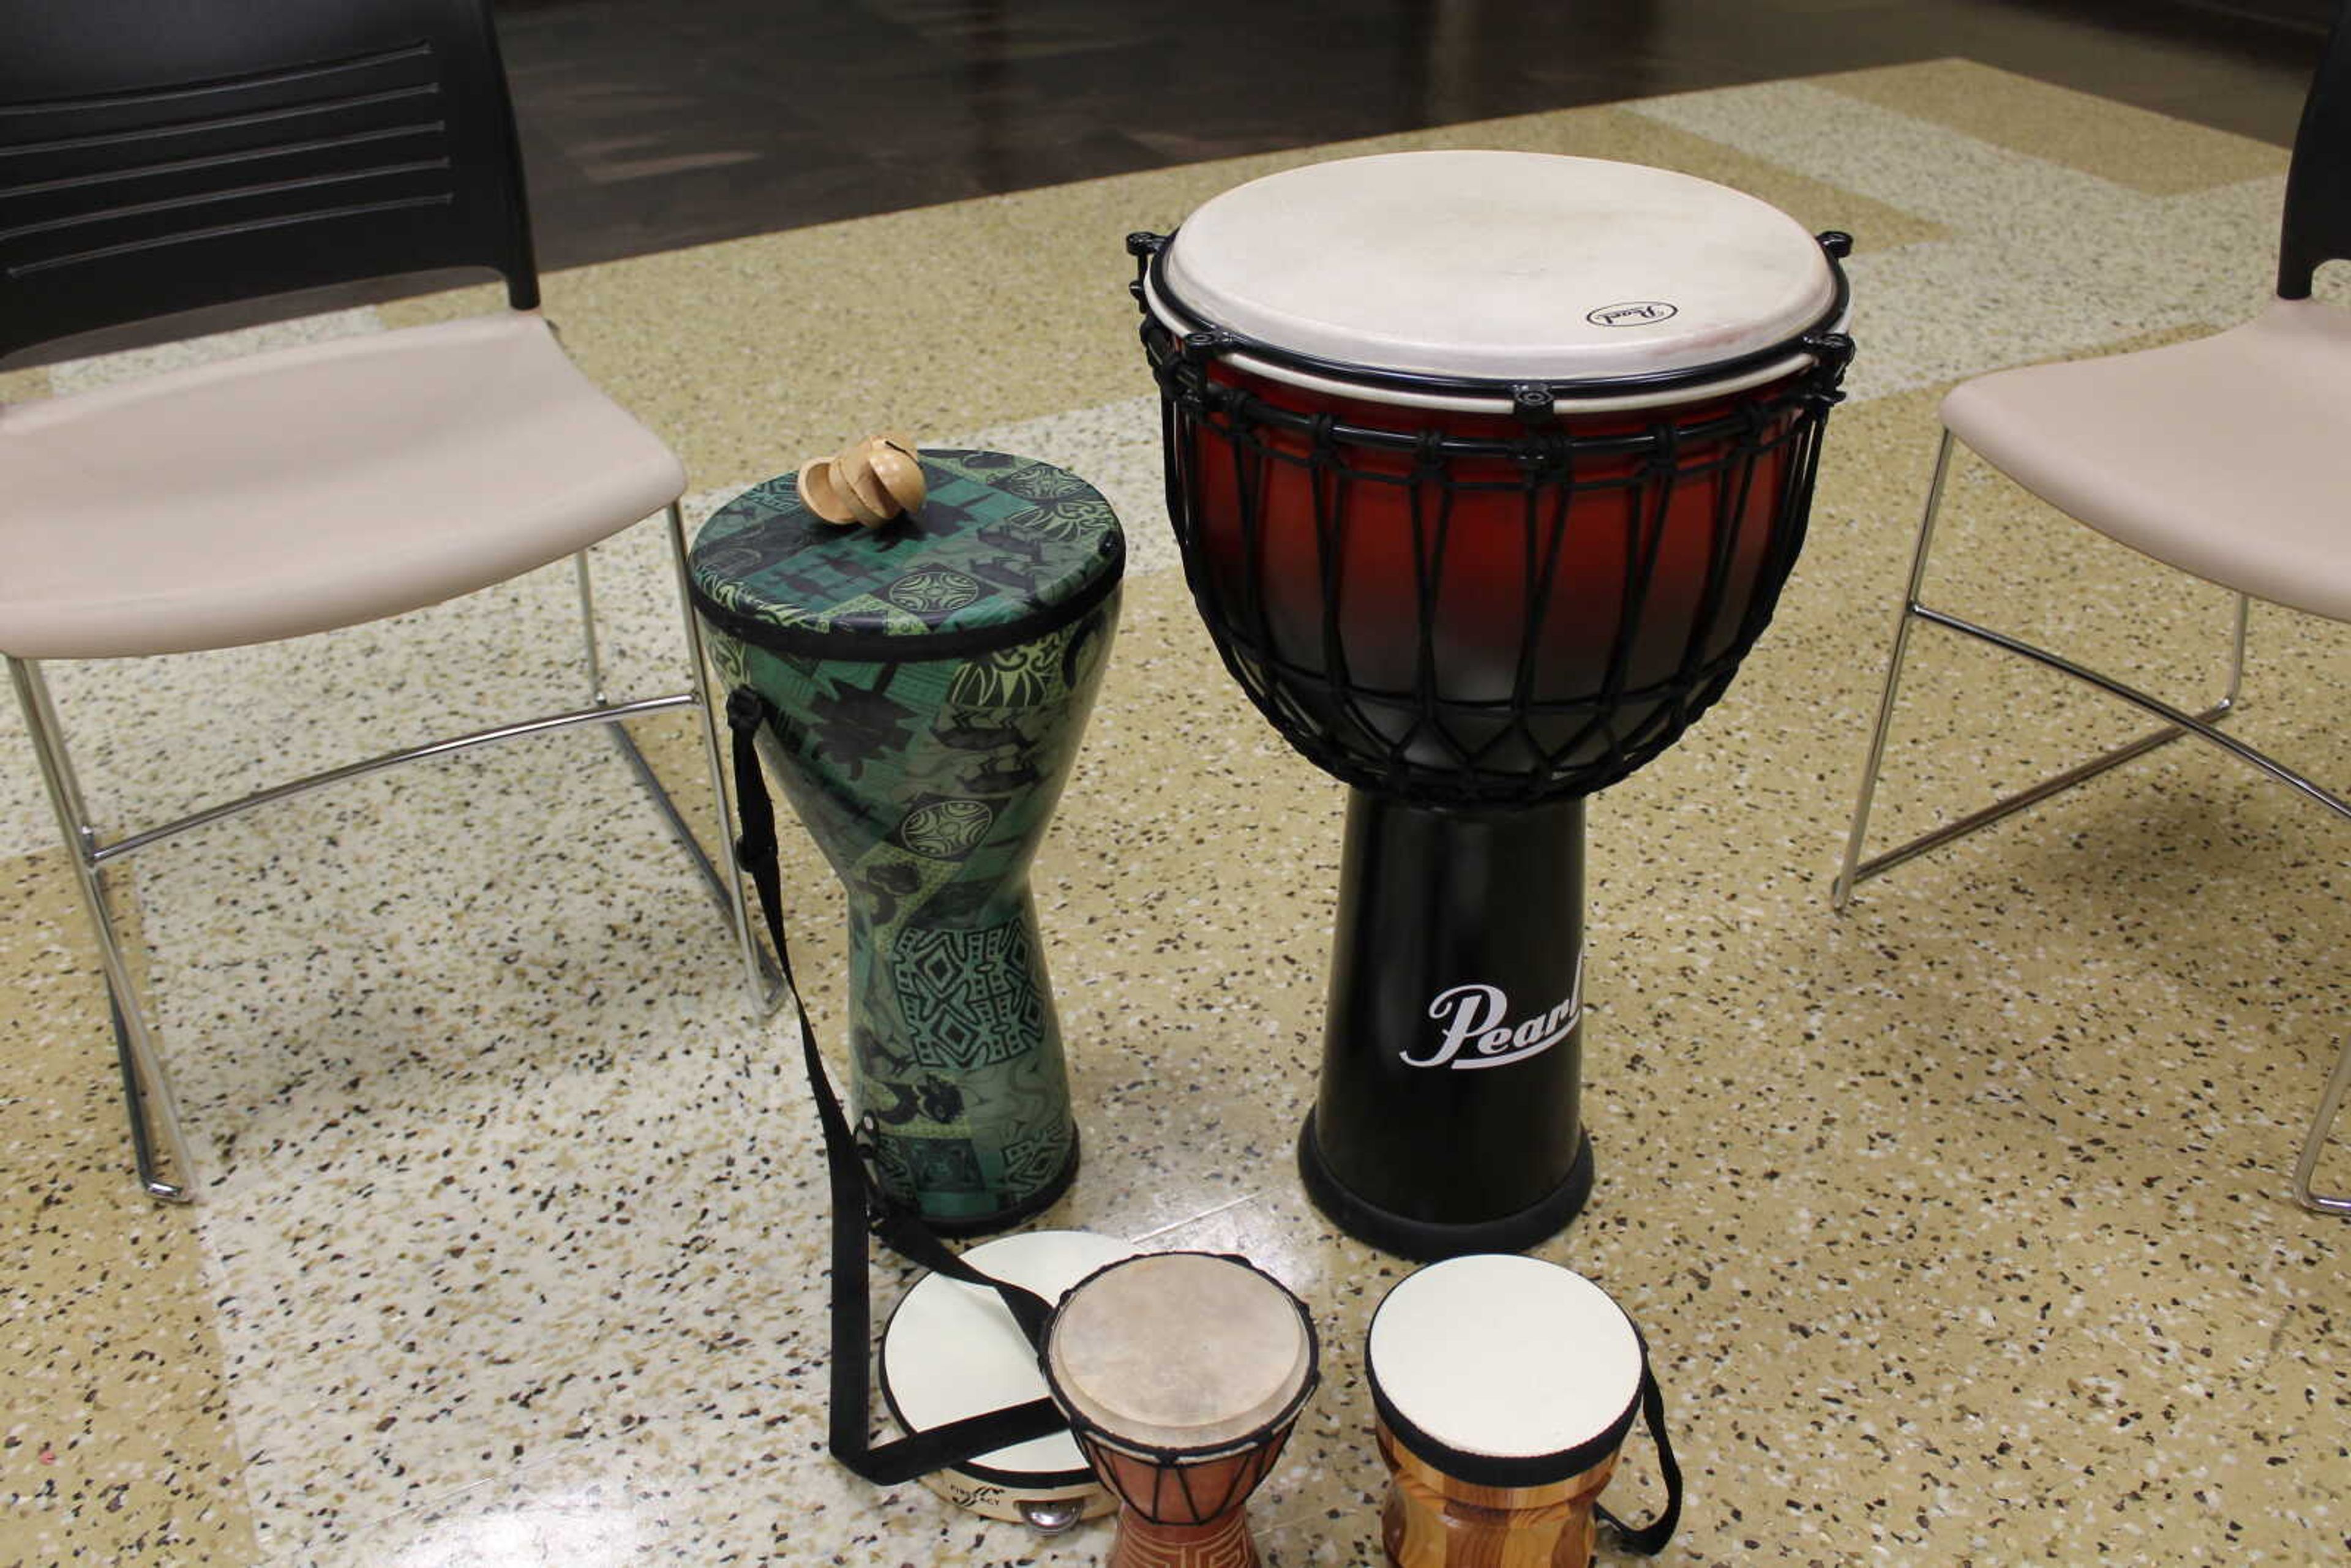 Drumming it out: Expressive Arts and managing stress